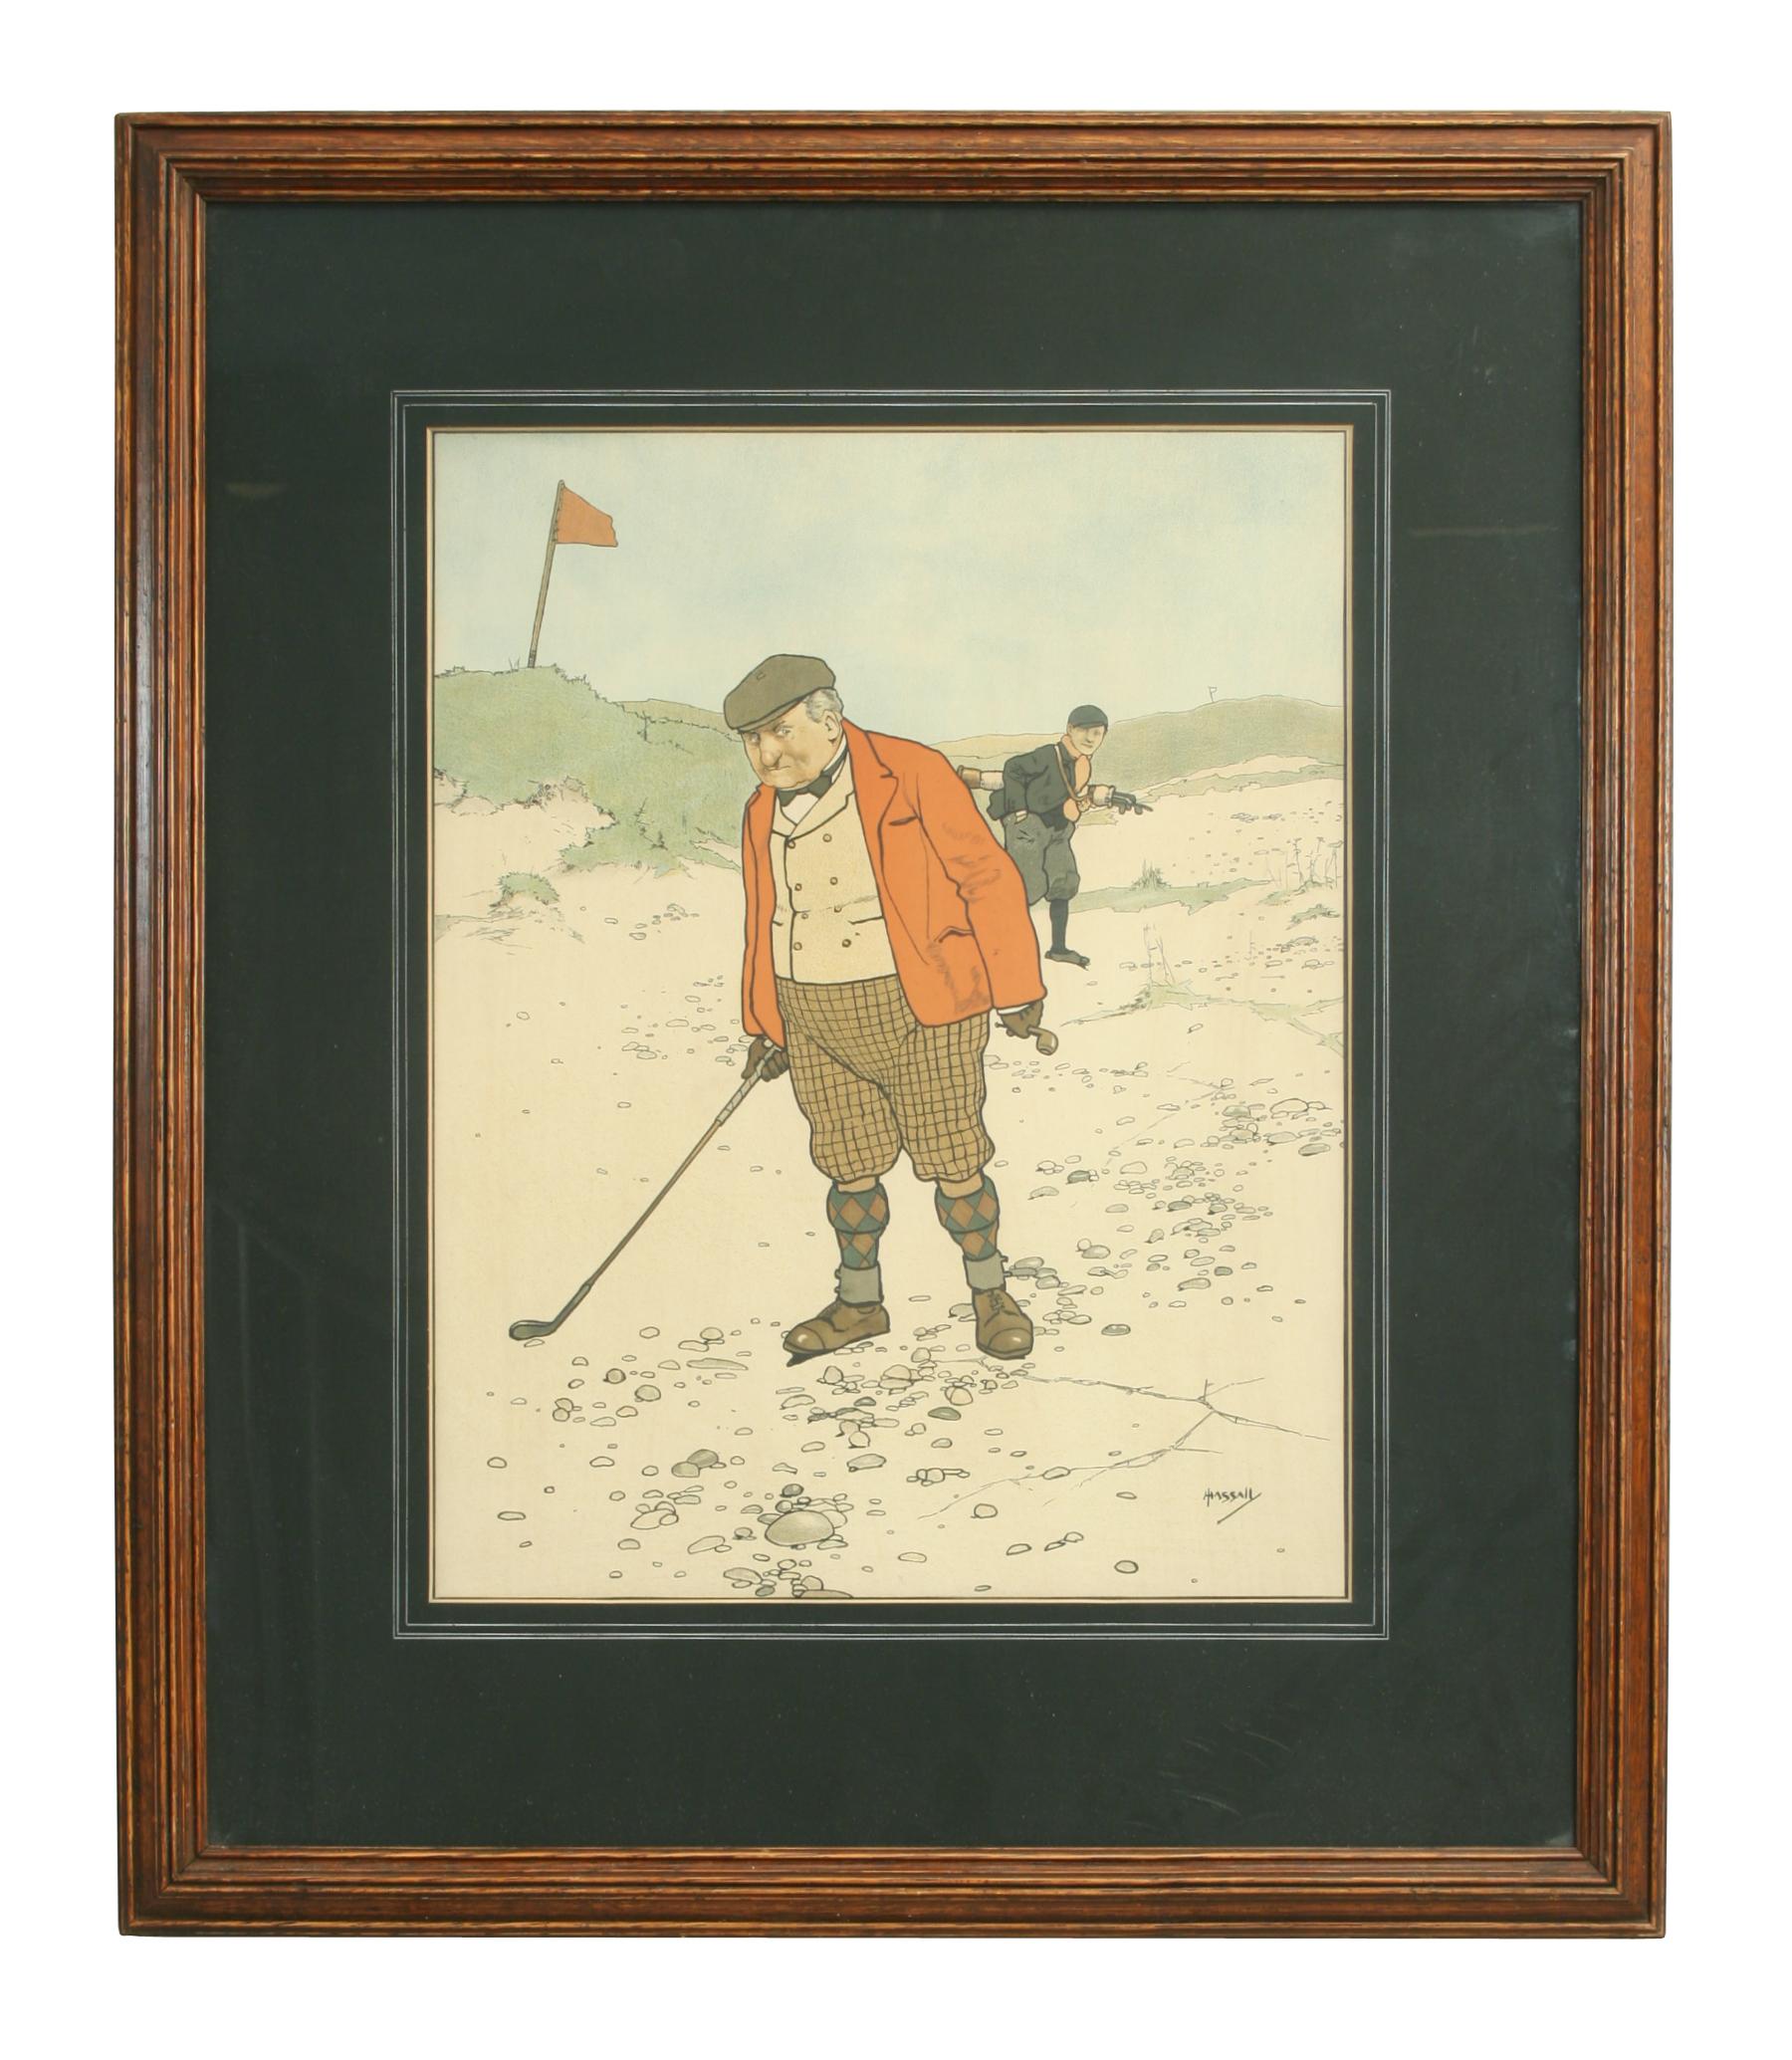 John Hassall golf print 'Lost Ball'.
A very nice golfing chromolithograph after J. Hassall entitled 'Lost Ball'. The colourful golf print is in the original oak frame. The picture depicts a golfer looking for his ball in amongst a load of pebbles,